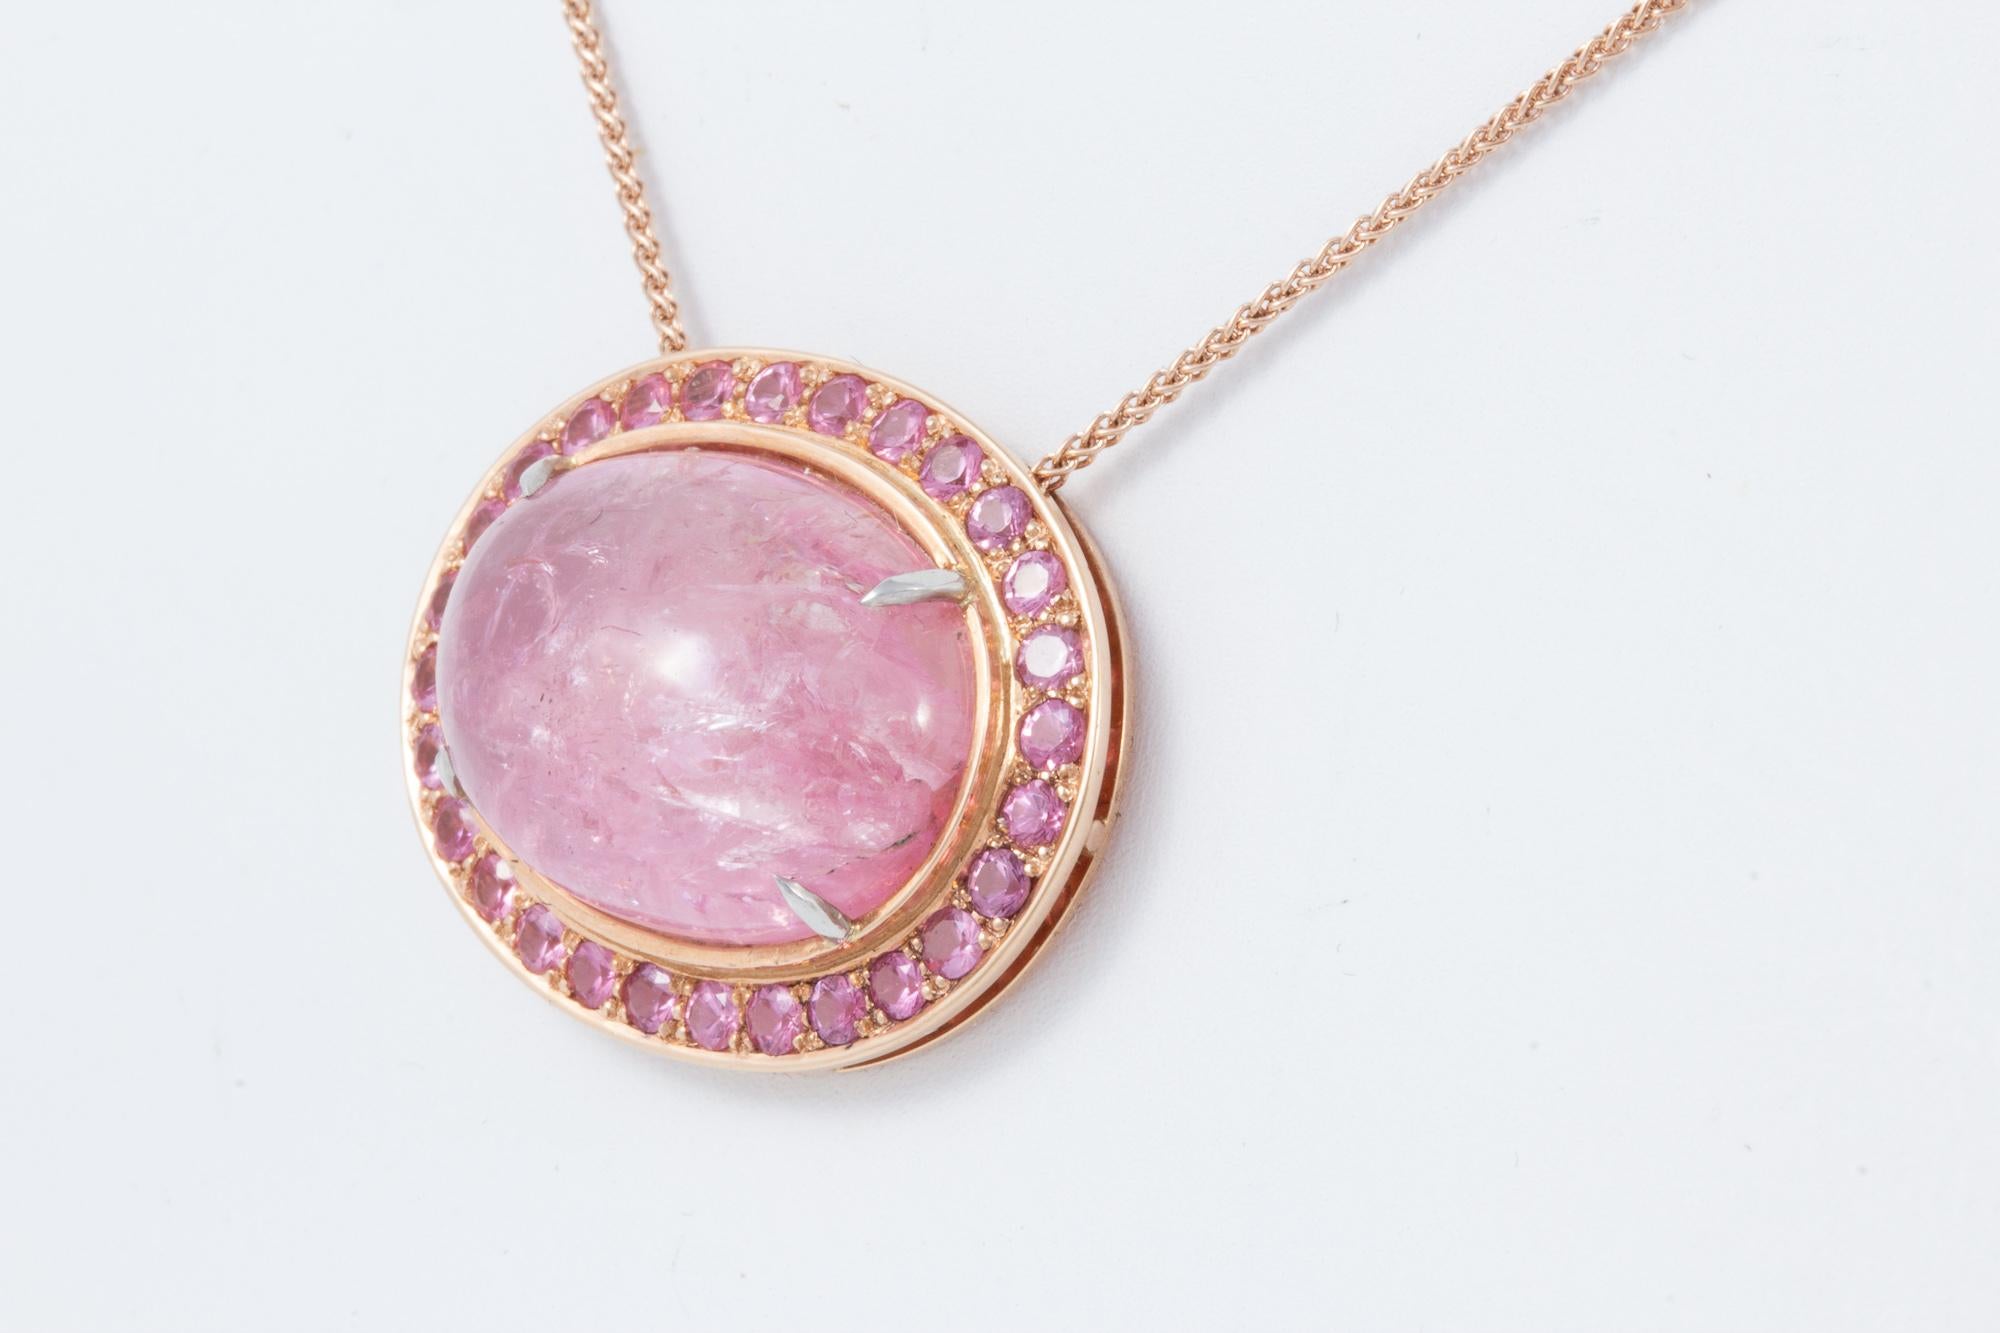 Rare Pink Fancy Tanzanite Cabochon Necklace in 18 kt Rose Gold 5